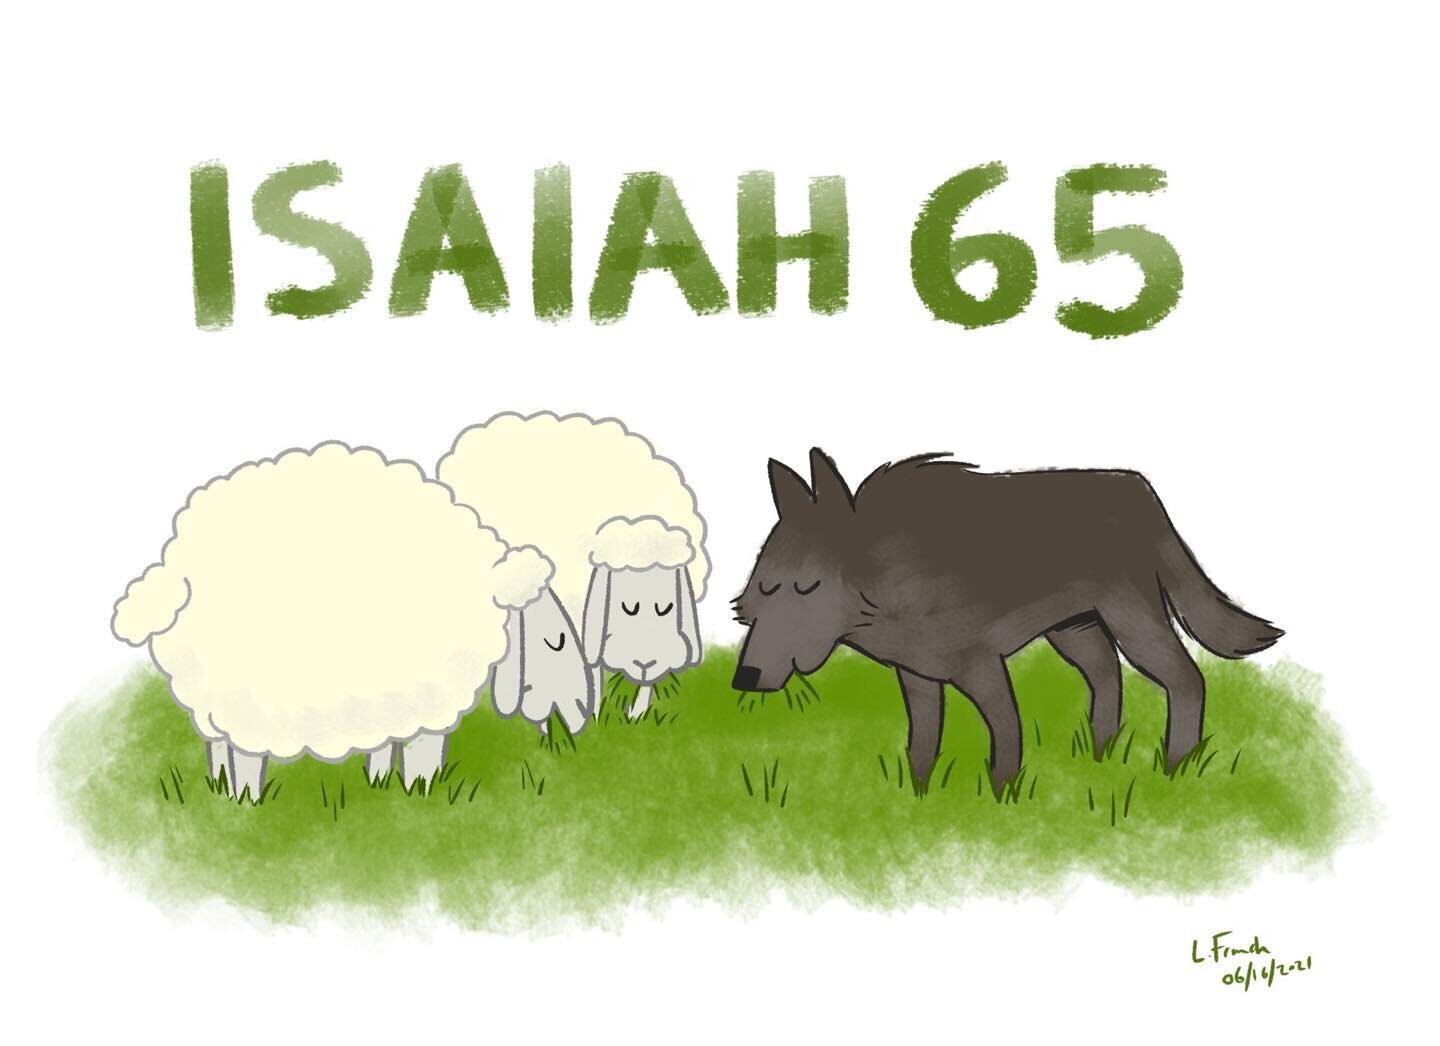 Join us for Breaking Bread tonight as we walk through Isaiah 65 together. See you at 5:30pm